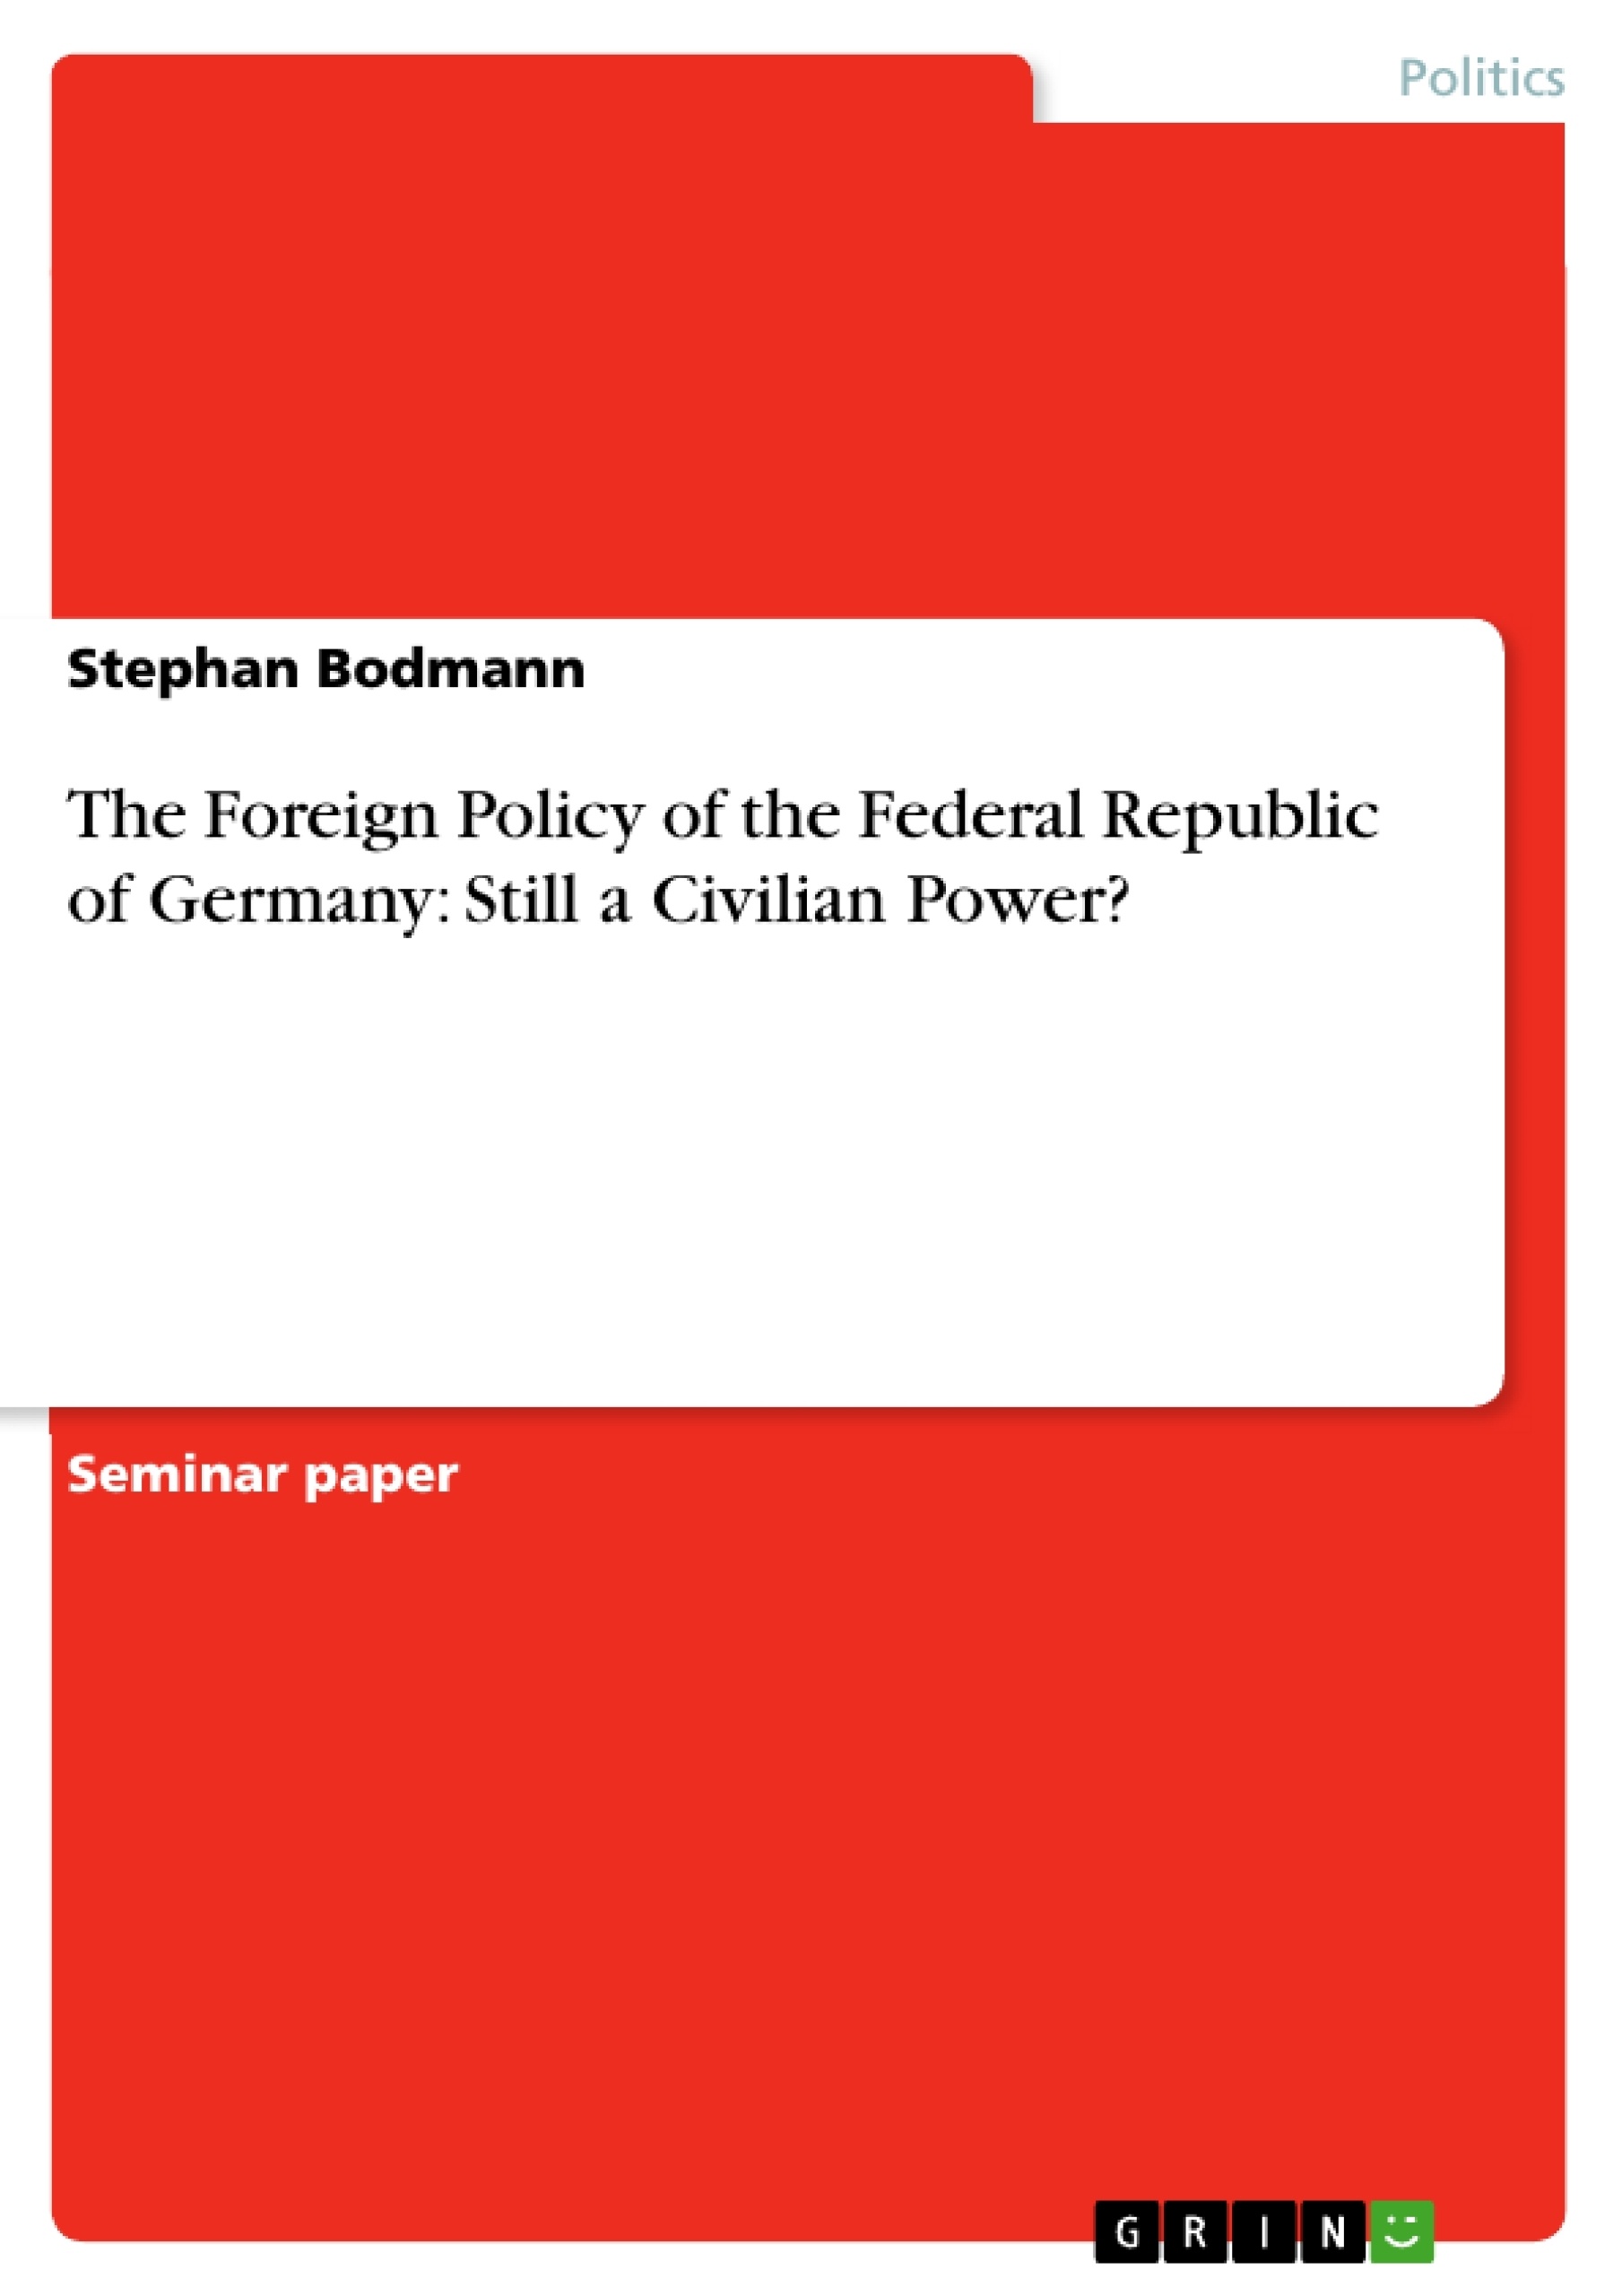 Title: The Foreign Policy of the Federal Republic of Germany: Still a Civilian Power?